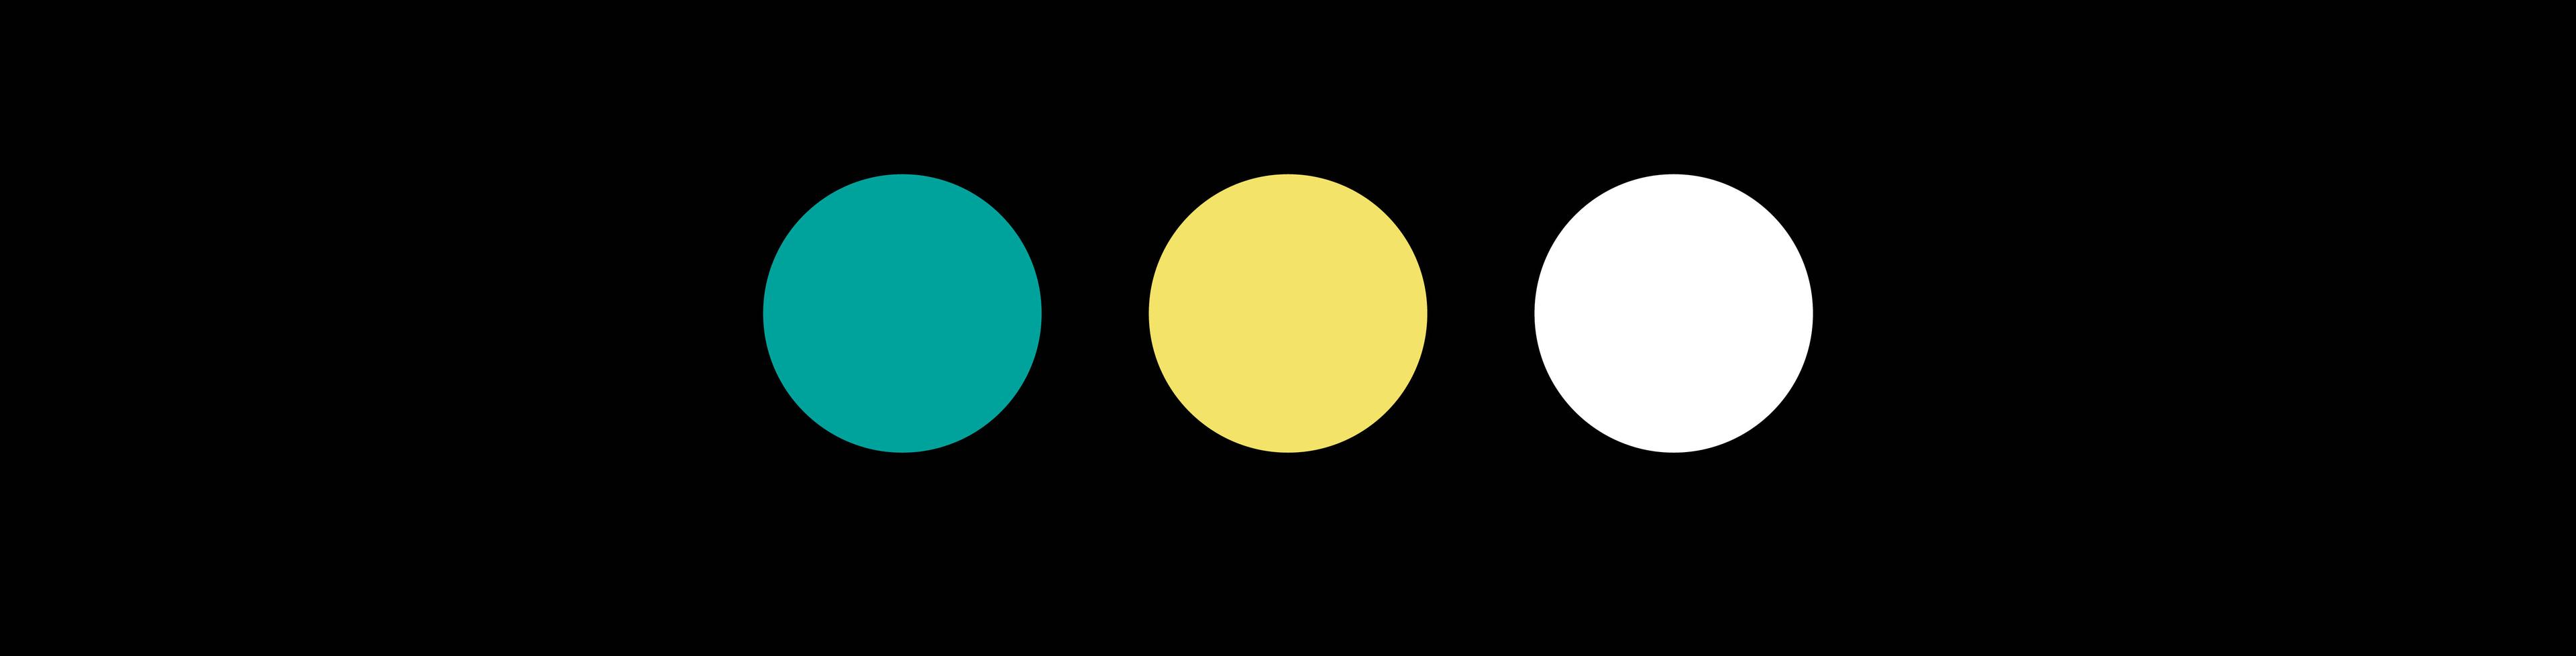 Jalongi color palette (teal, yellow and white)